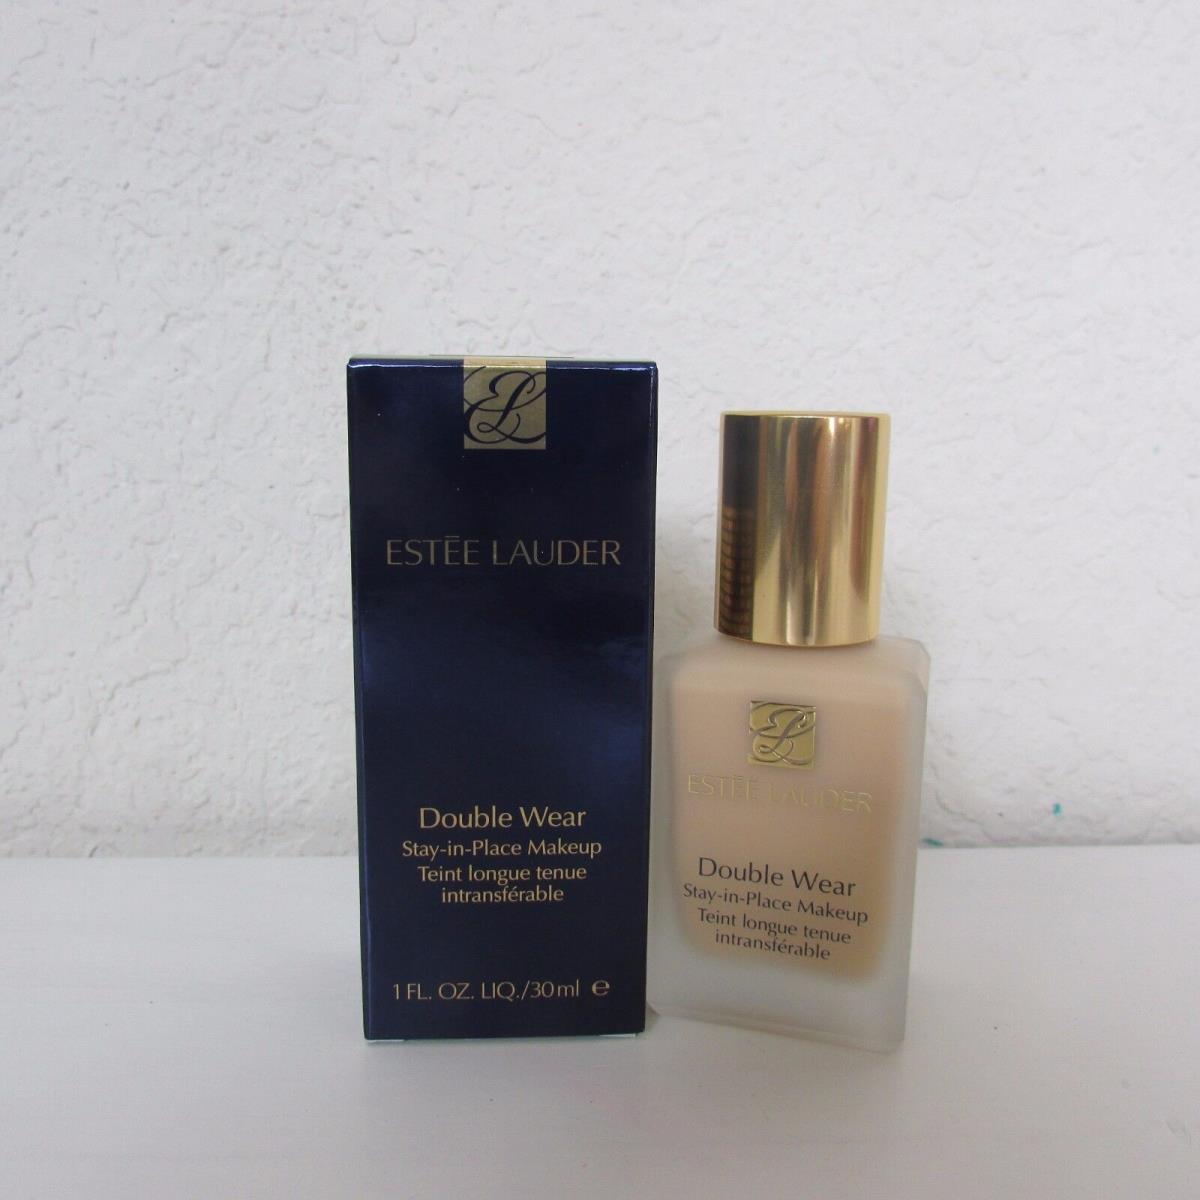 Estee Lauder Double Wear Stay-in-place Makeup Choose Your Shade 1.0 Oz/30 ml 1W1 Bone